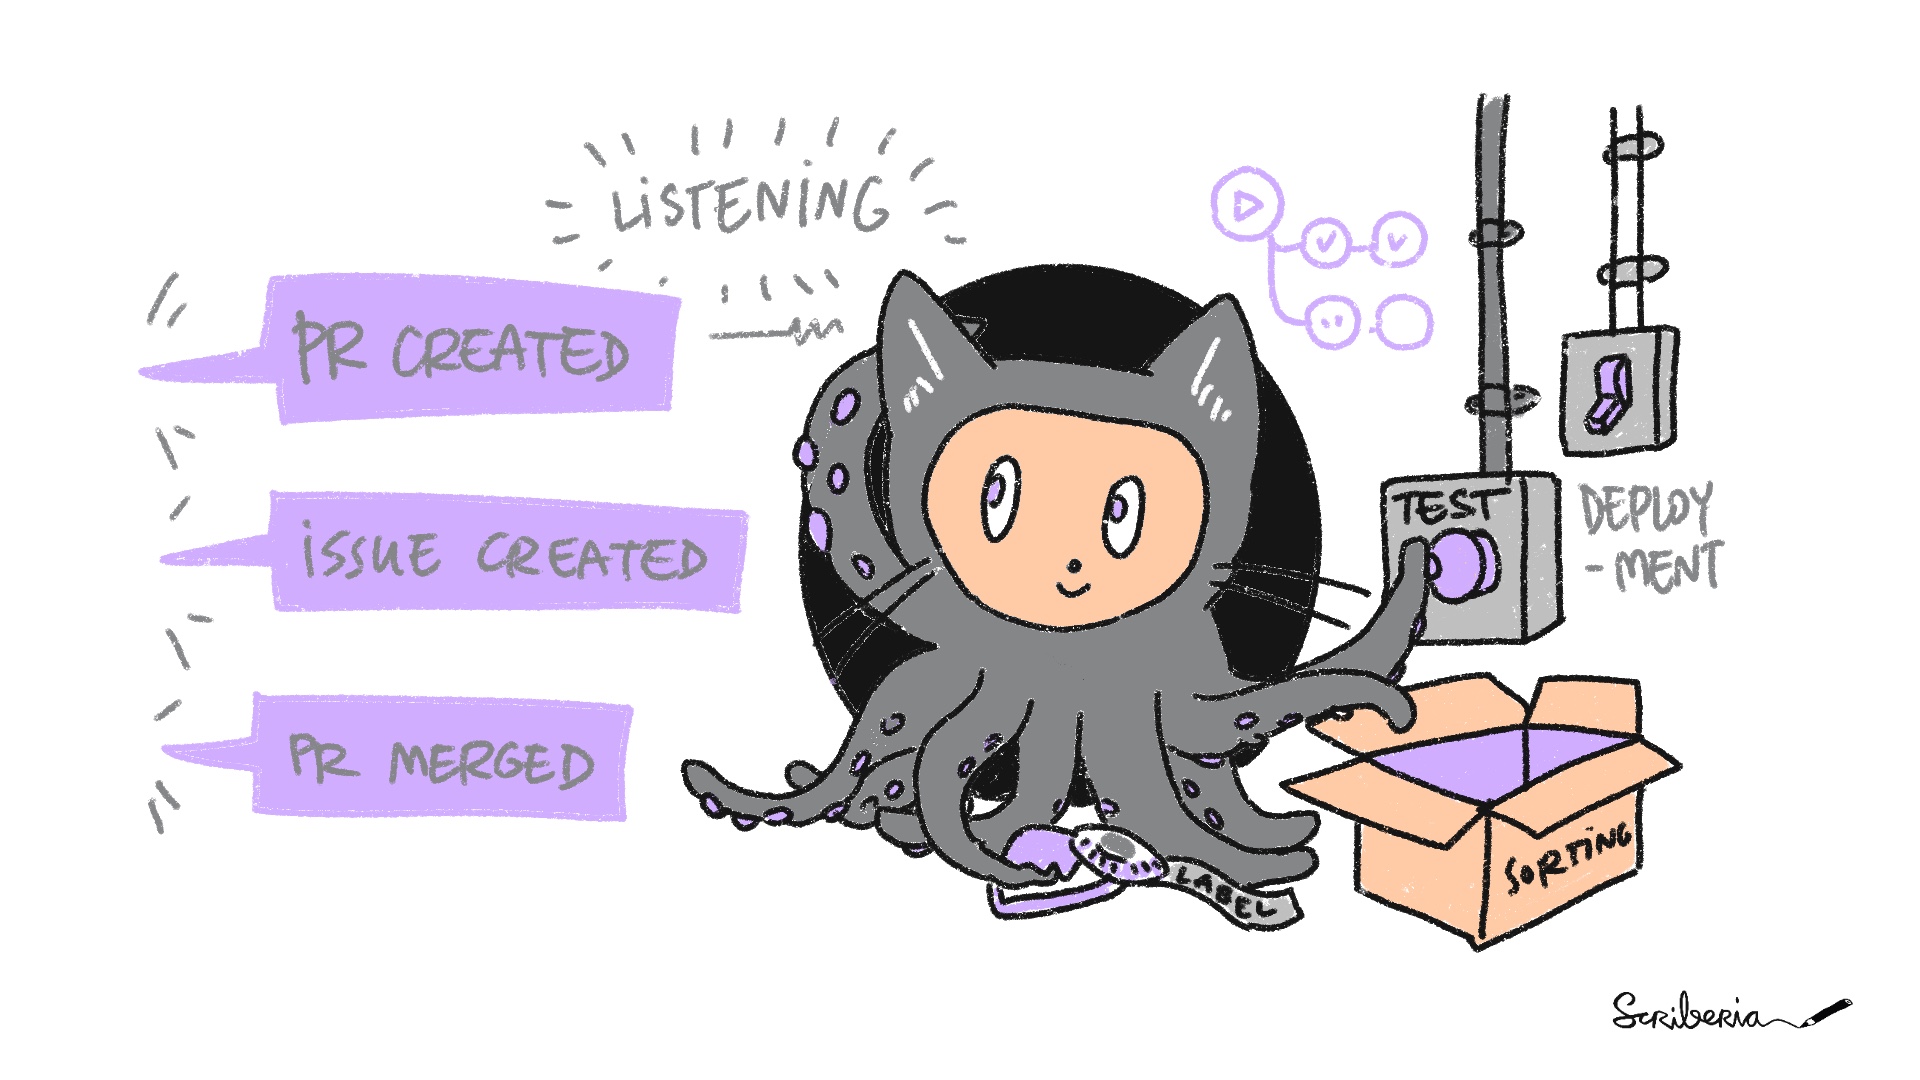 A diagram describing how GitHub action listen to an event (for example, `PR` created, issue created, PR merged) and then trigger a job which can be testing, sorting, labelling or deployment.